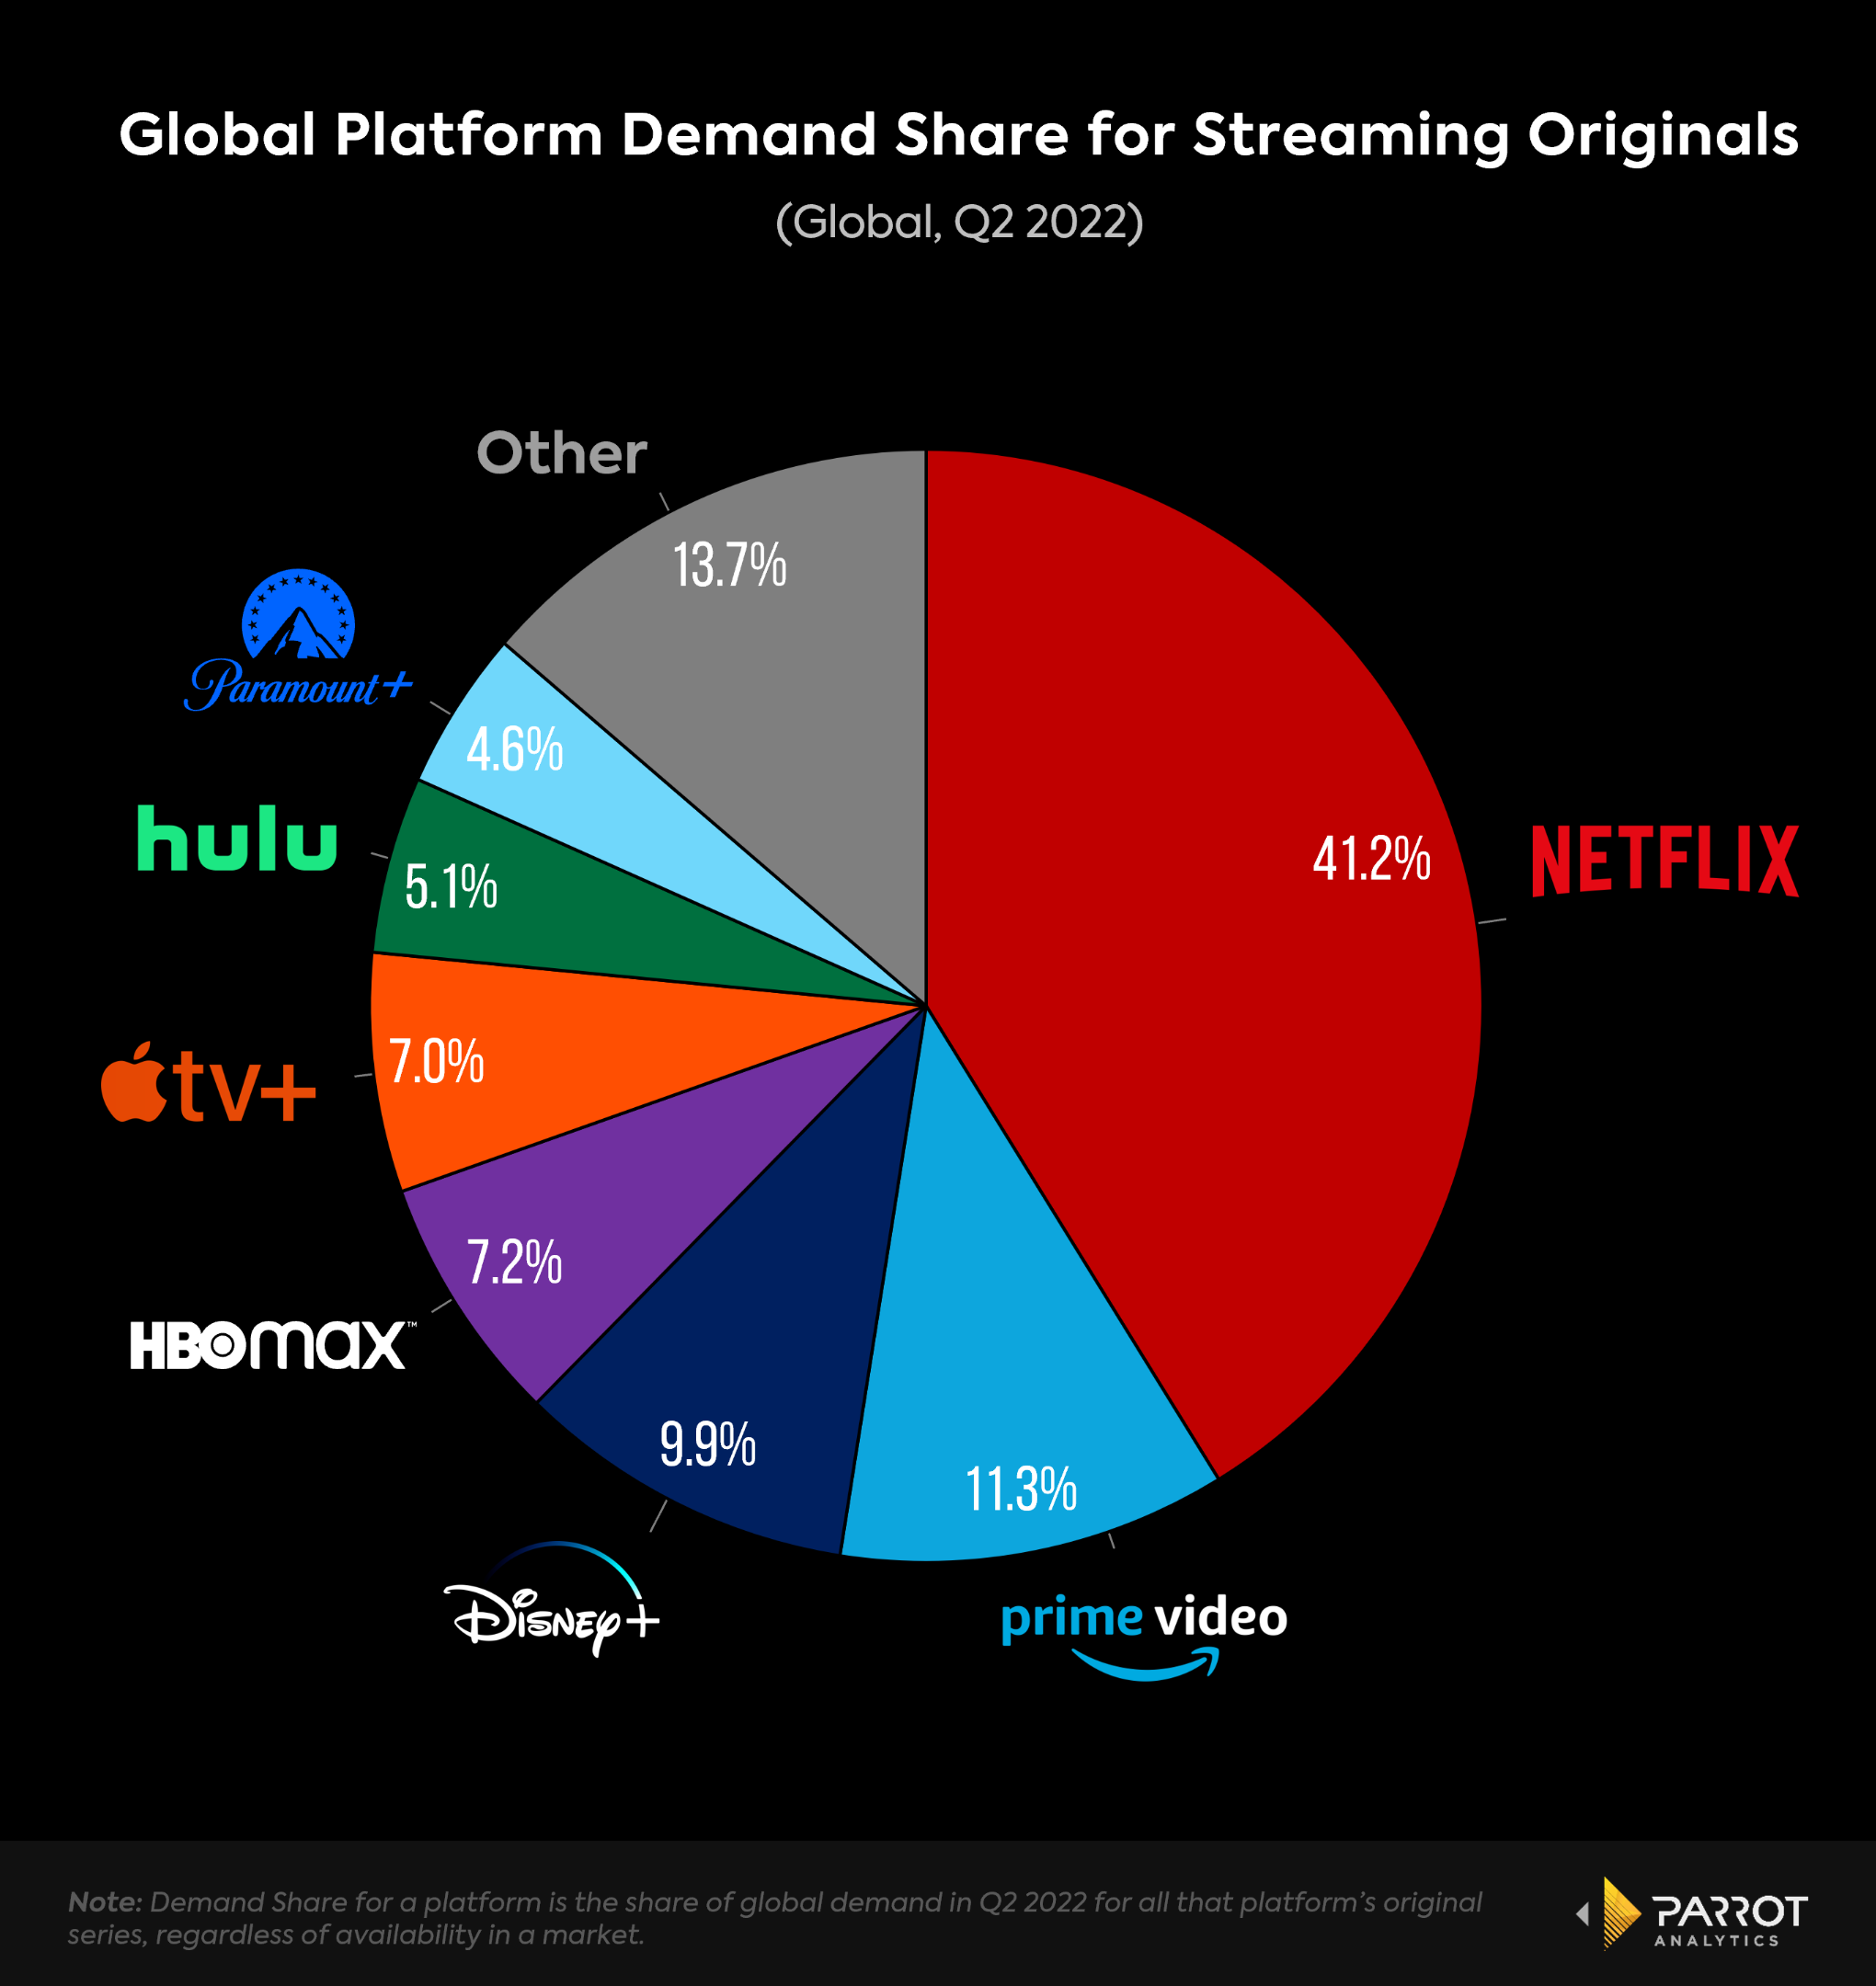 A pie chart showing the global demand share for each streaming service, including Netflix, Disney Plus, and Prime Video